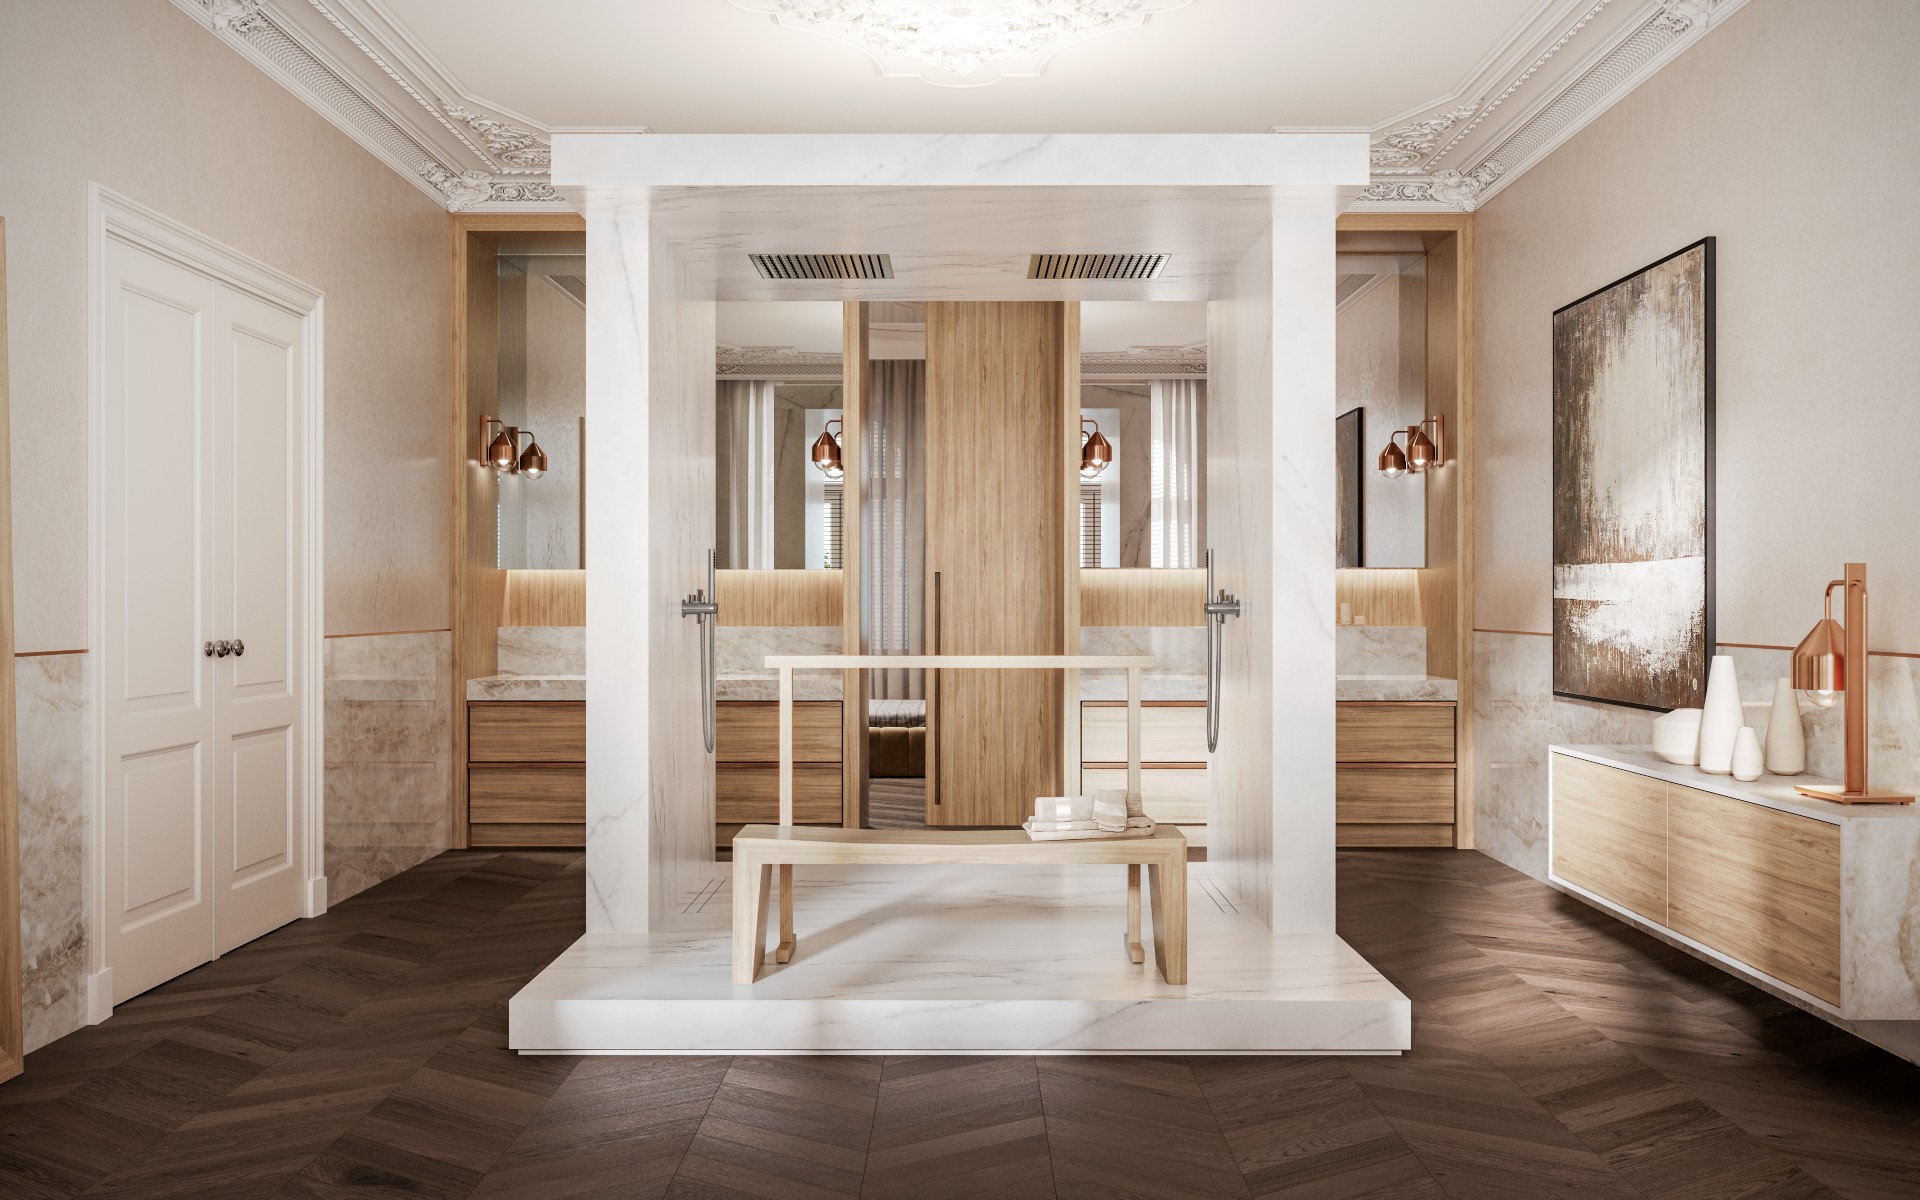 Image of THE PALAZZO IMÁGEN GENERAL in Sawaru: a sensory bathroom designed by Claudia Afshar to appeal to the sense of touch - Cosentino